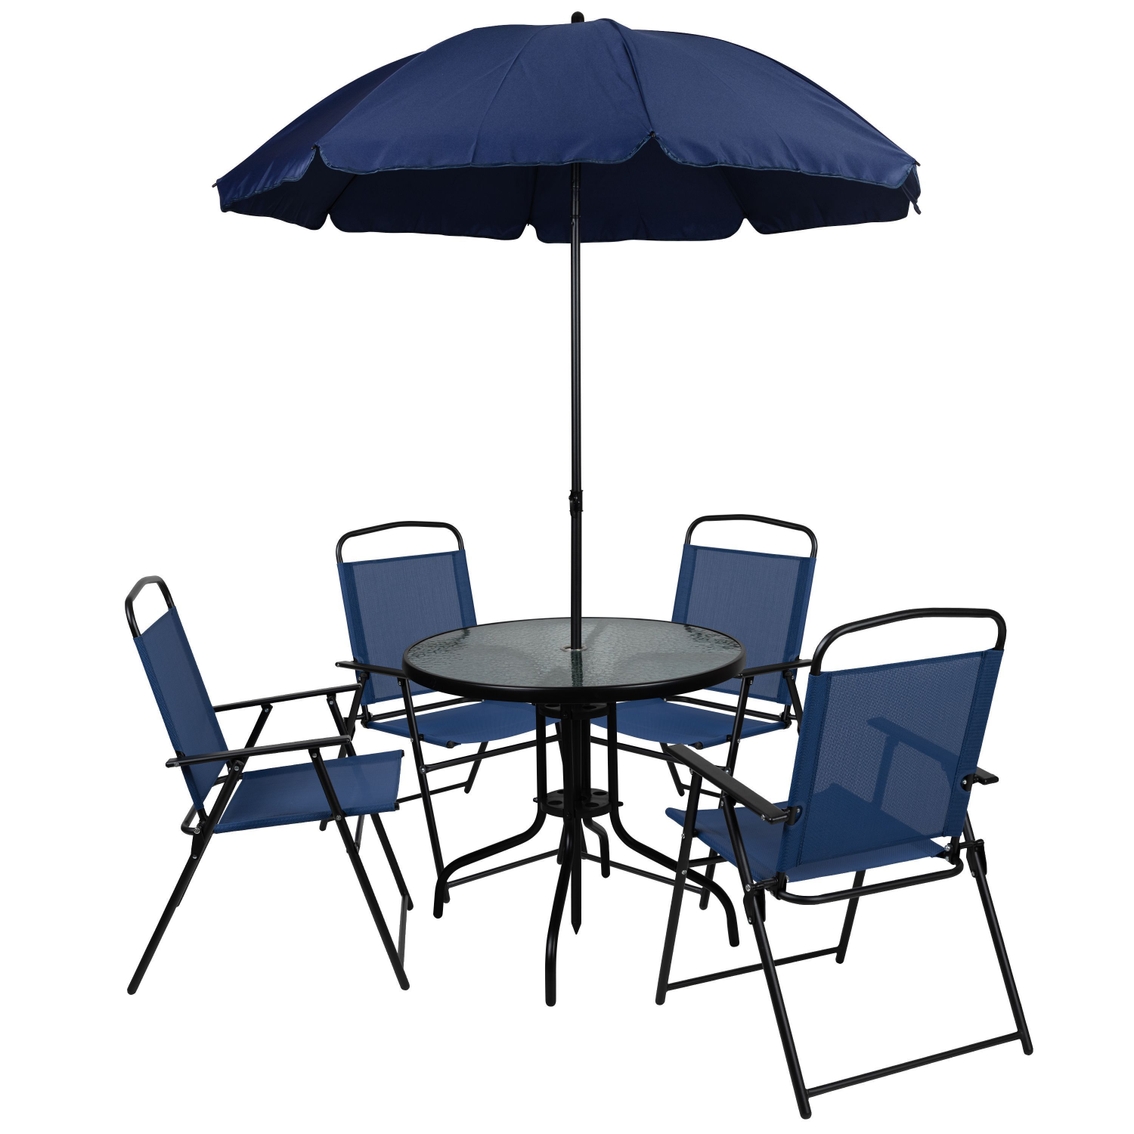 Flash Furniture 6 Piece Patio Set w/ Table, Umbrella and 4 Chairs - Image 2 of 5